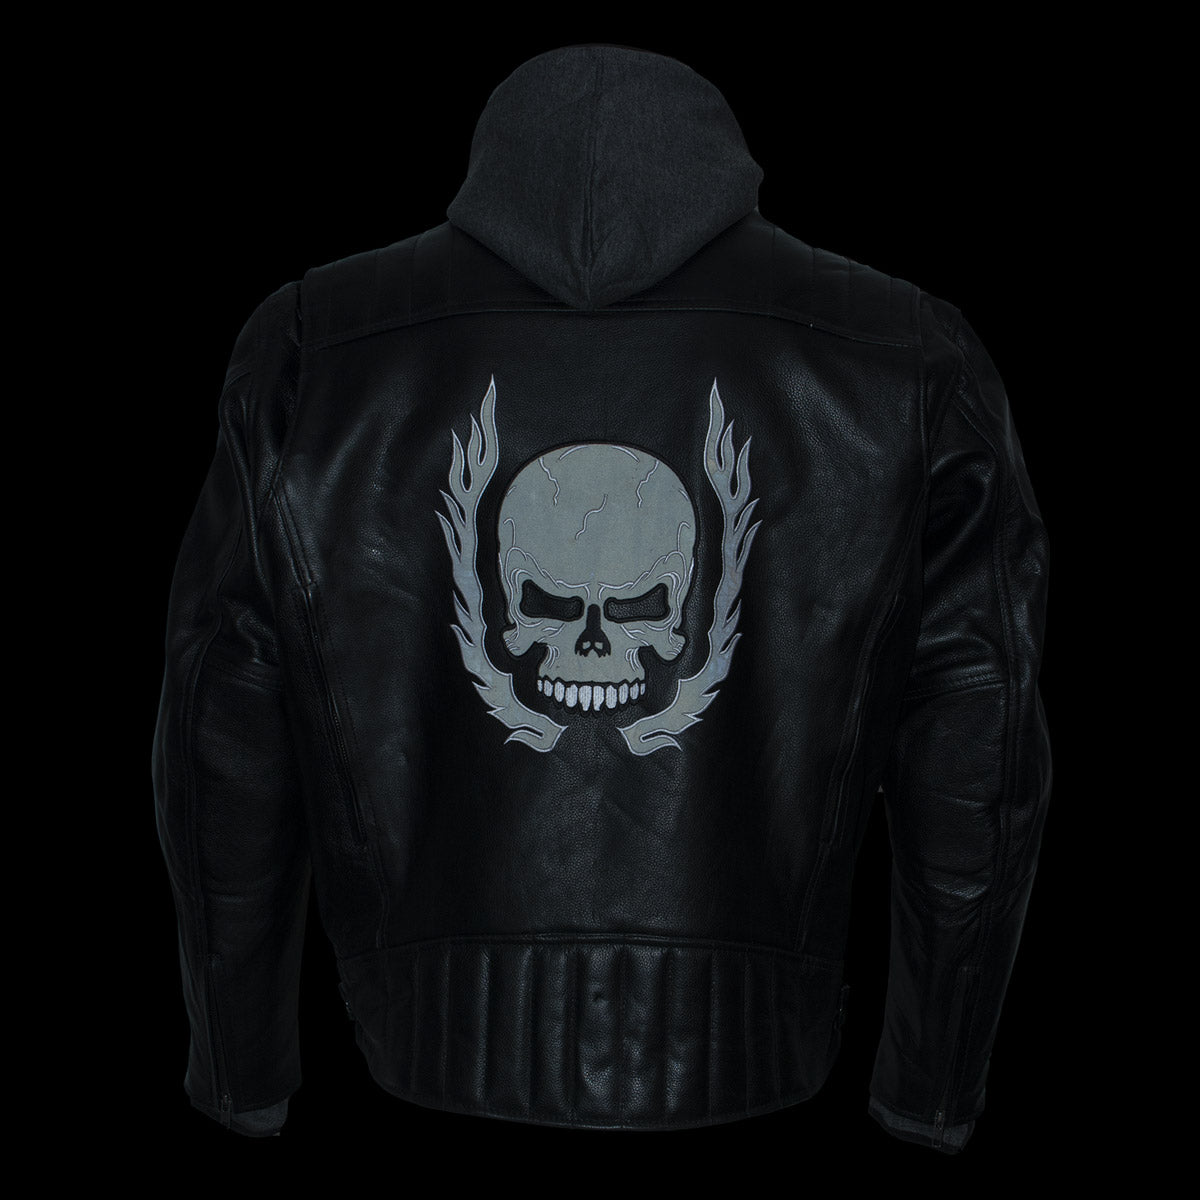 Xelement BXU573 Men's Black 'Alibi' Armored Leather Motorcycle Jacket with Skull Embroidery and Hoodie